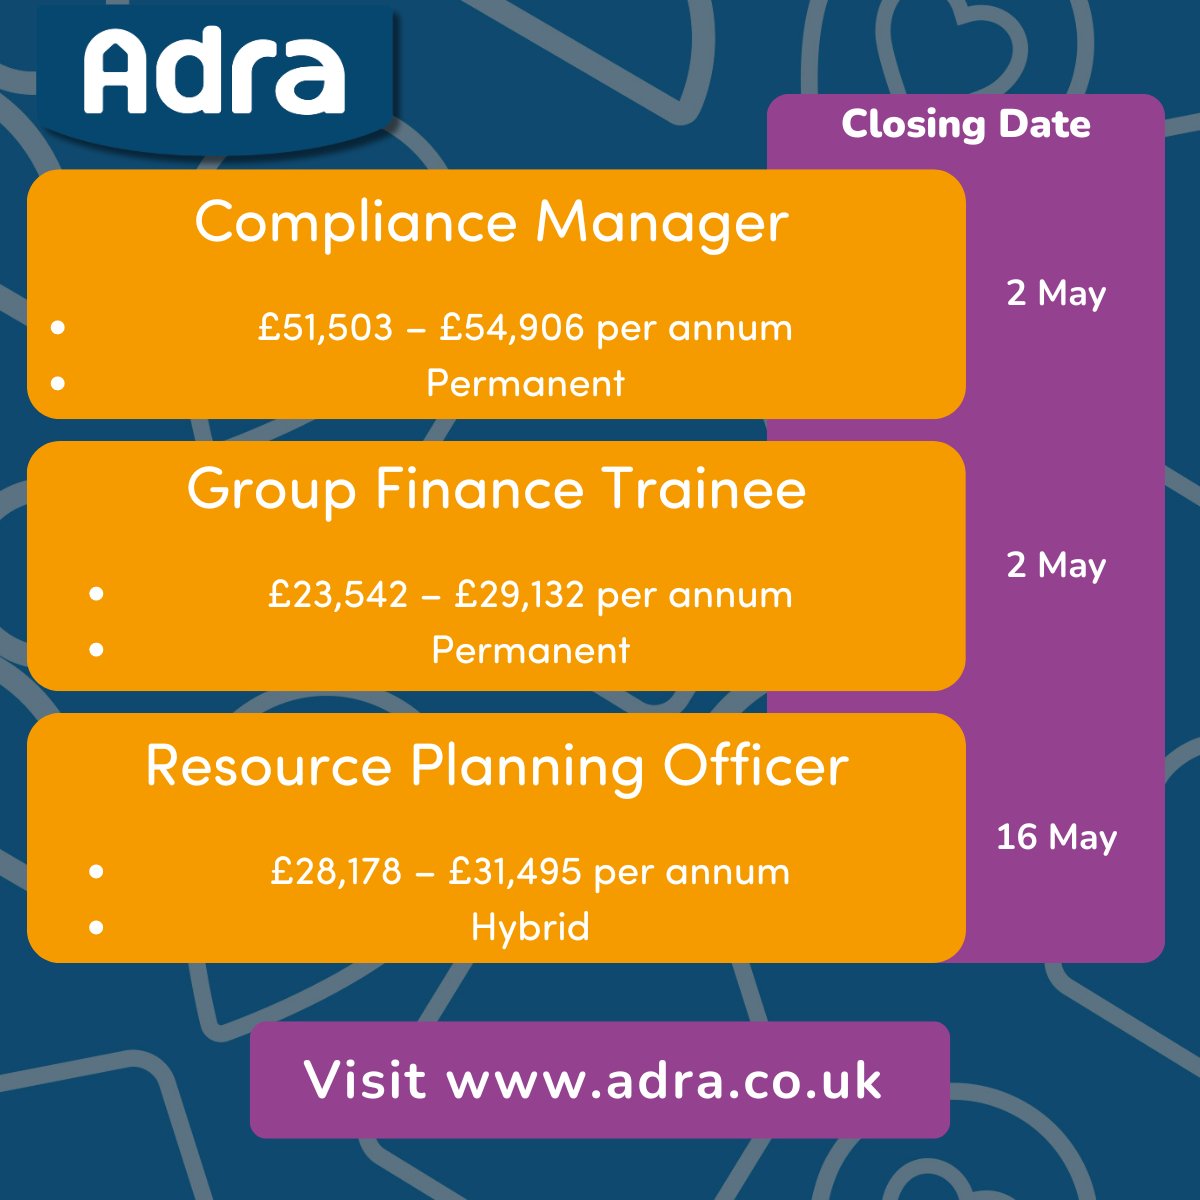 Have you seen our latest jobs? We have 3️⃣ new jobs live on our website at the moment We encourage applications from women, tenants and minority groups who are currently under-represented in our workforce. Take a look ⤵️ adra.co.uk/en/jobs/curren…